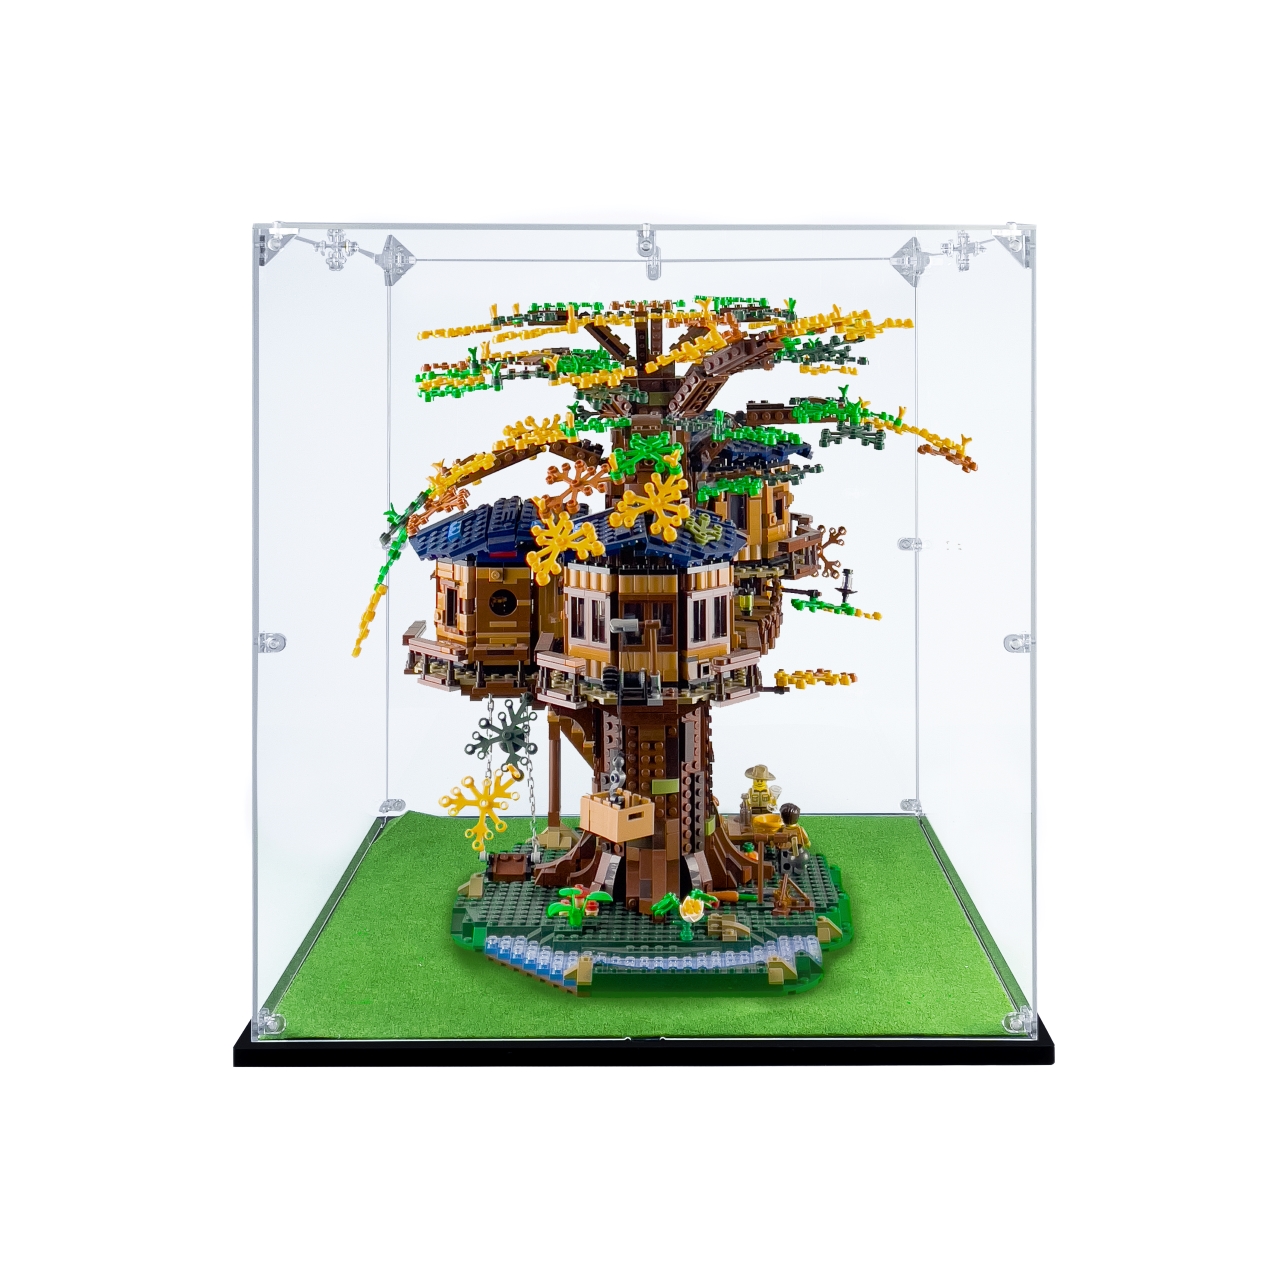 Acrylic display Case for LEGO Tree House 21318 100% rating seller 